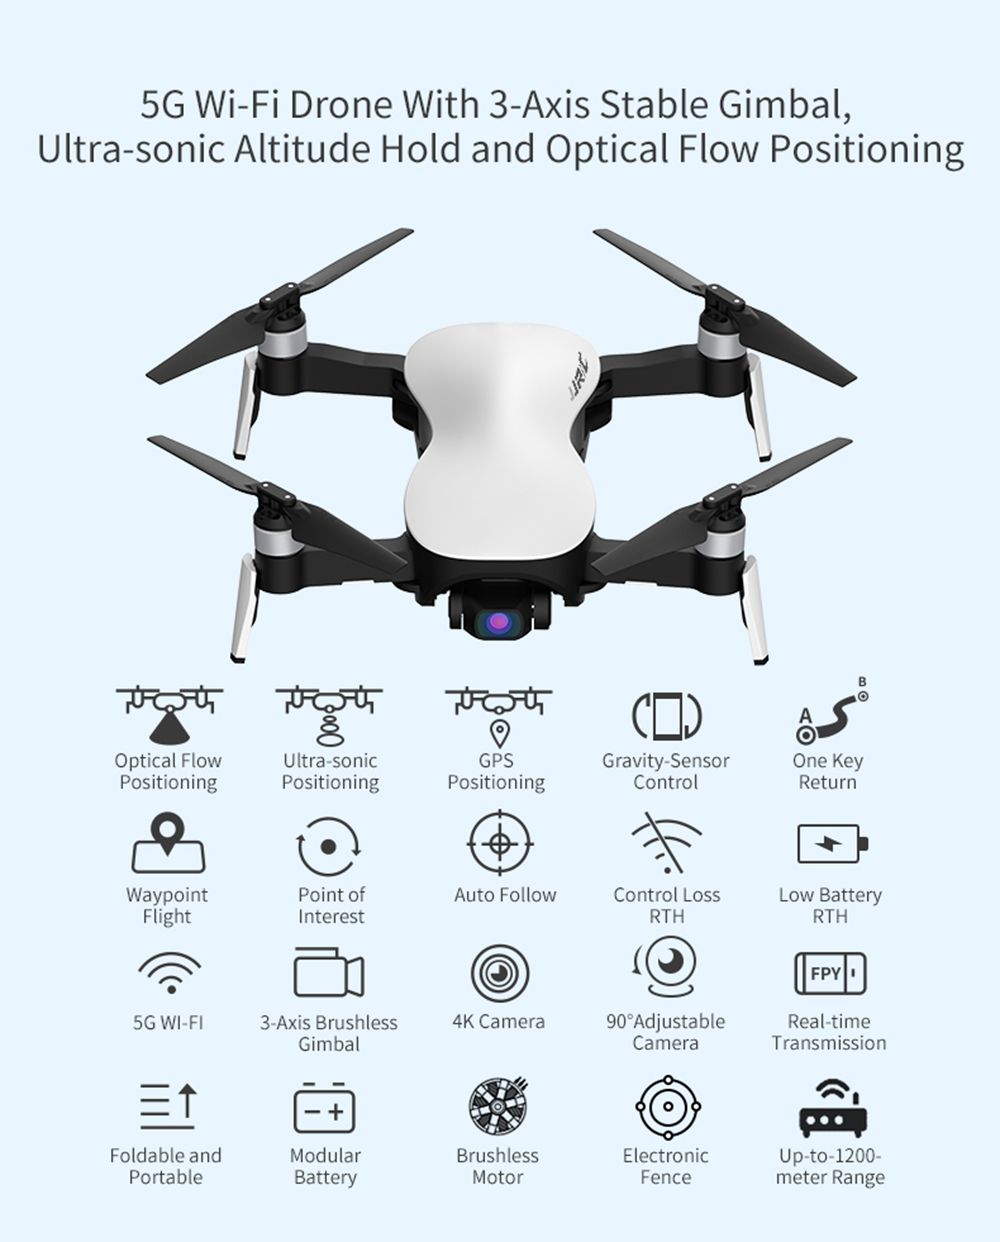 JJRC X12 AURORA 4K 5G WIFI 1.2km FPV GPS Foldable RC Drone With 3Axis Gimbal 50X Digital Zoom Ultrasonic Positioning RTF - White Two Batteries with Bag